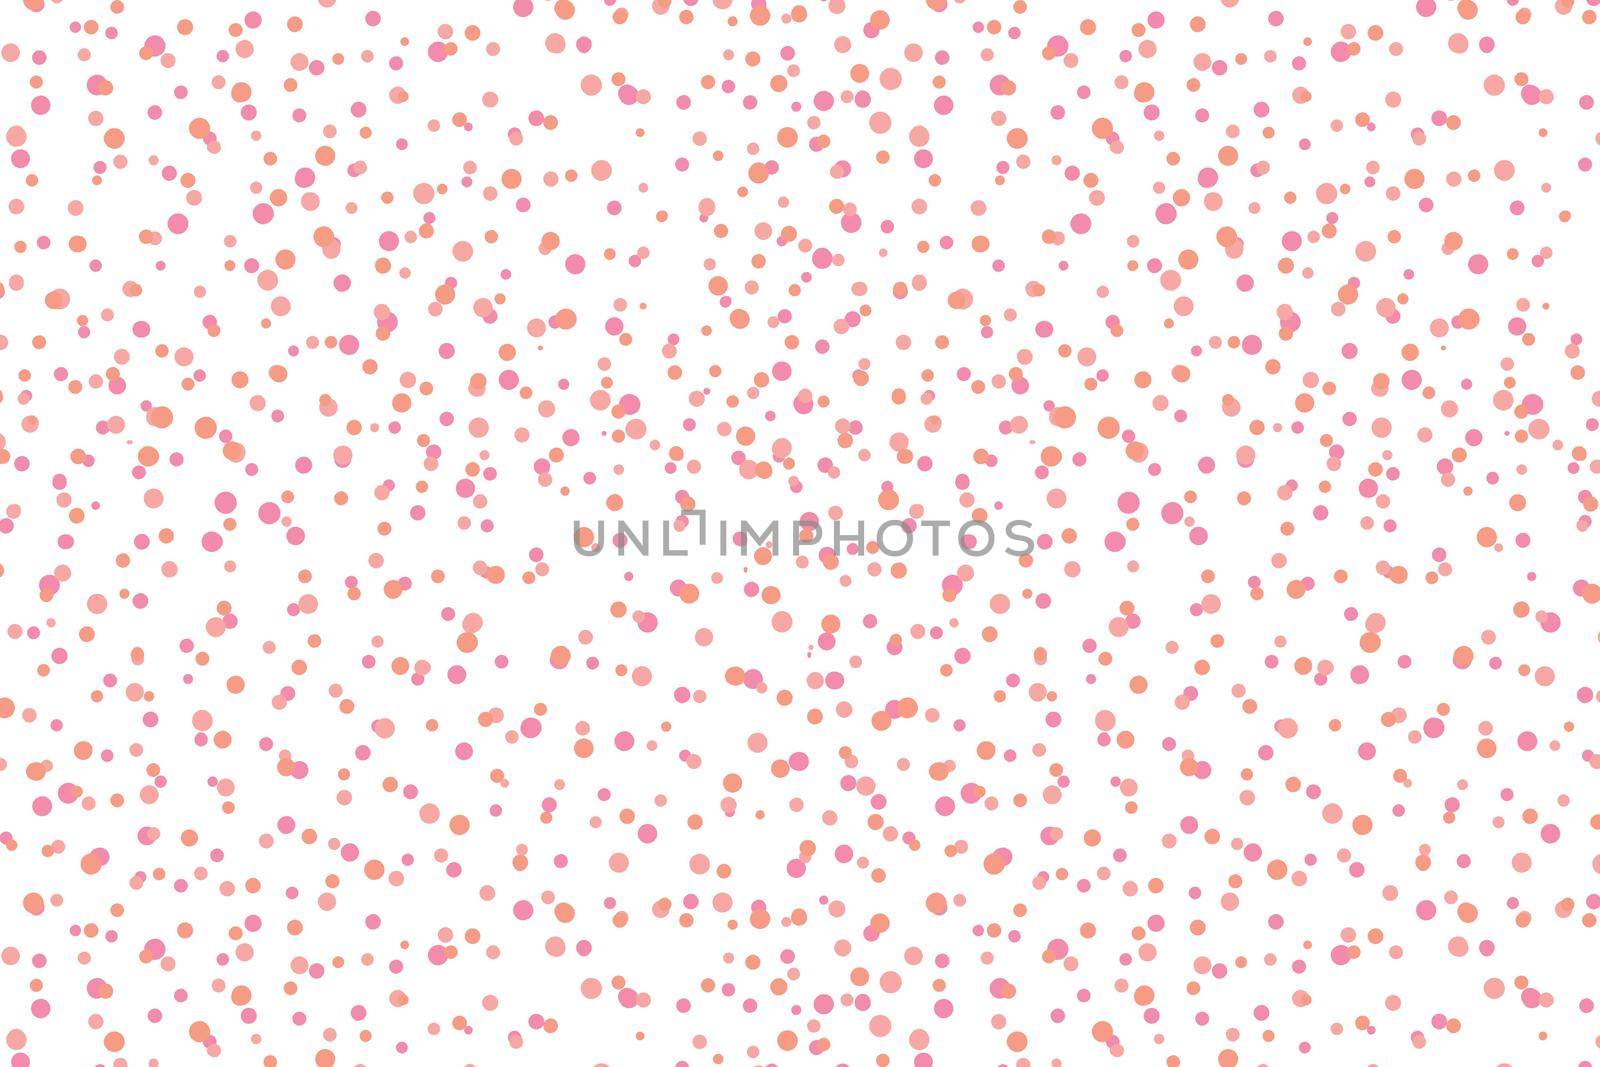 Light multicolor background, colorful vector texture with circles. Splash effect banner. Glitter silver dot abstract illustration with blurred drops of rain. Pattern for web page, banner,poster, card by allaku